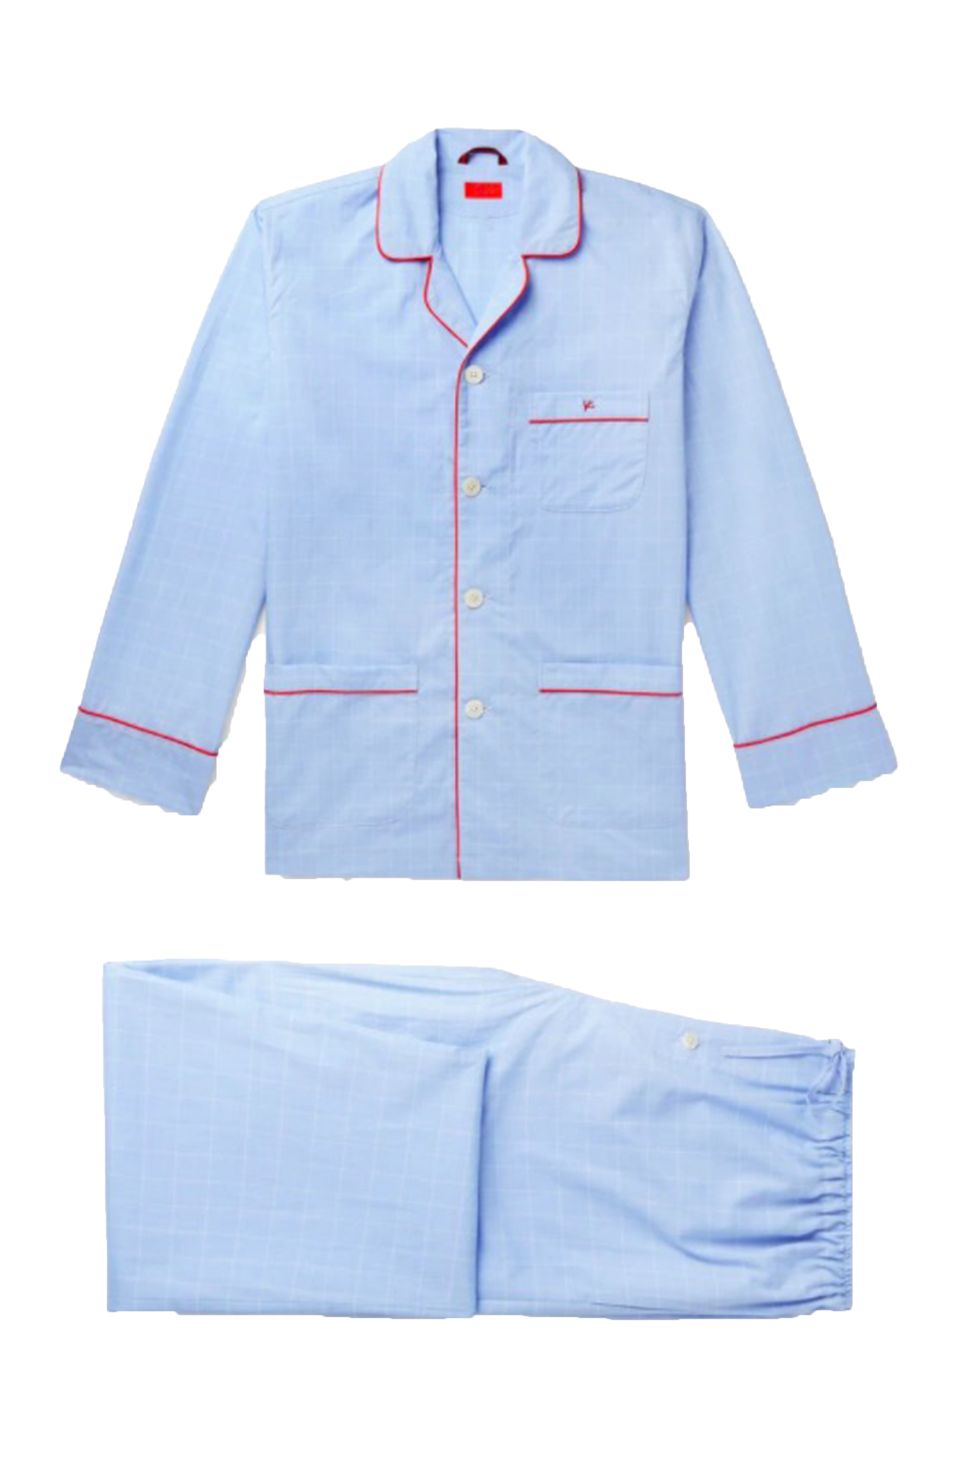 father's day gift guide   isaia pyjamas